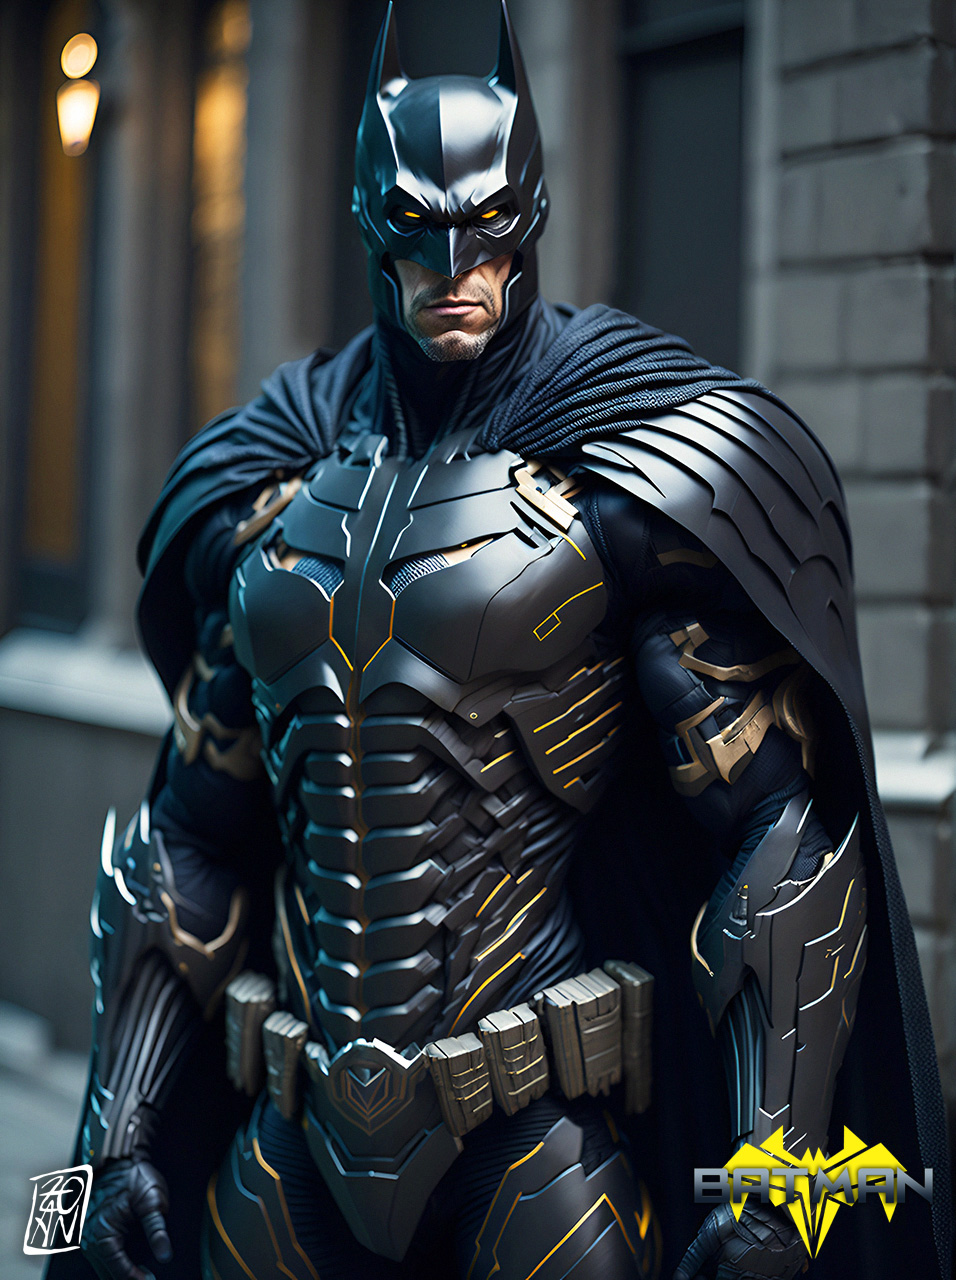 Image of BATMAN (Predator Suit) made with AI and Photoshop. The Batman by DC Comics – All Rights Reserved